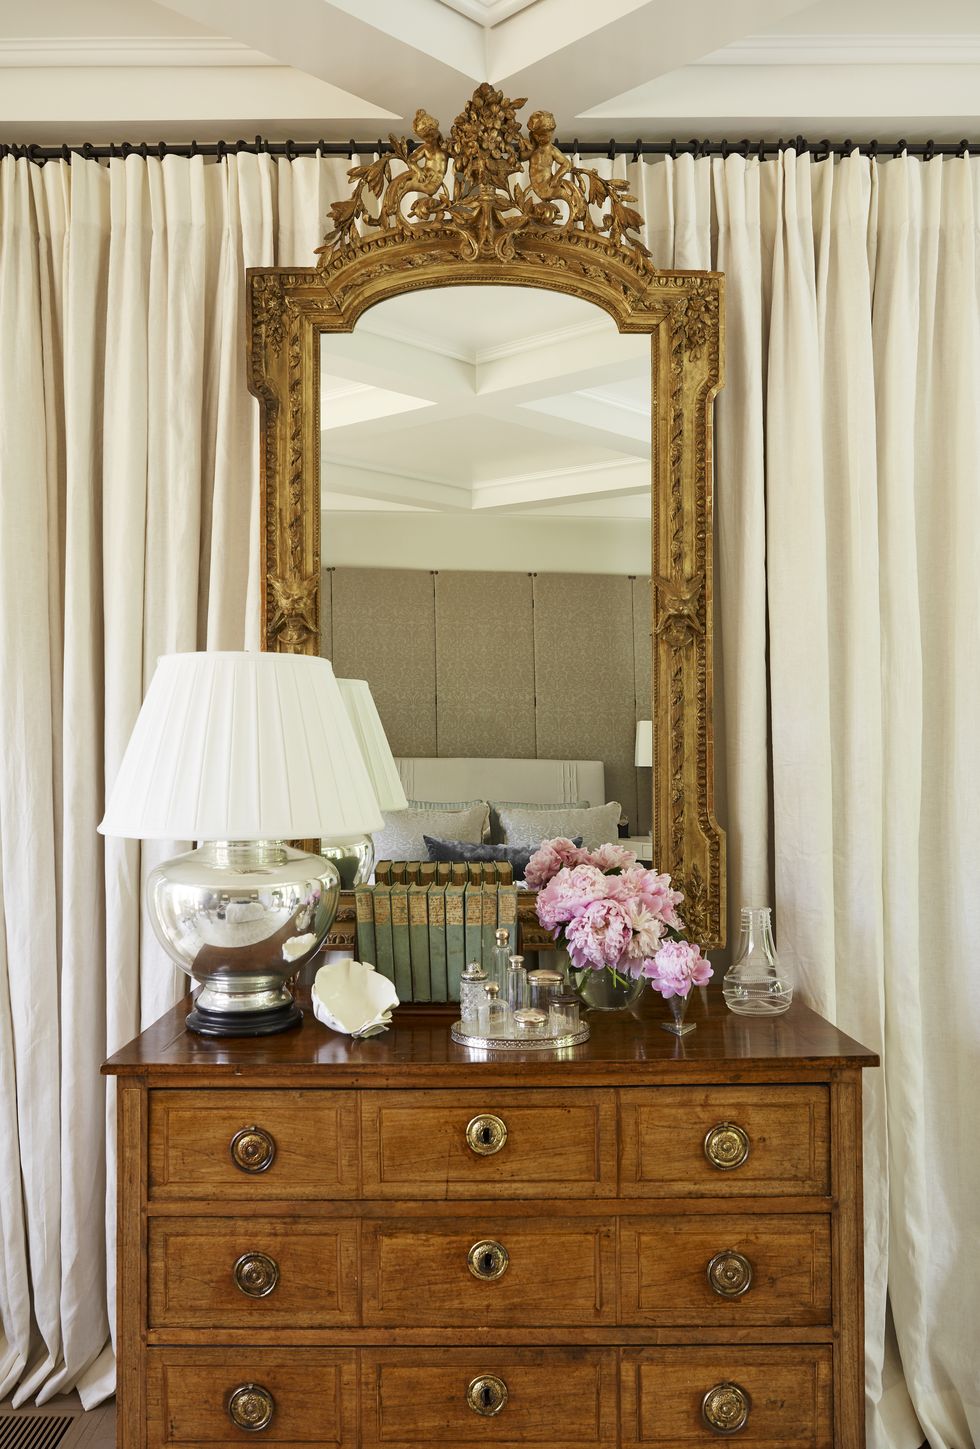 cream linen panels form a soft backdrop for a gilded mirror in the bedroom